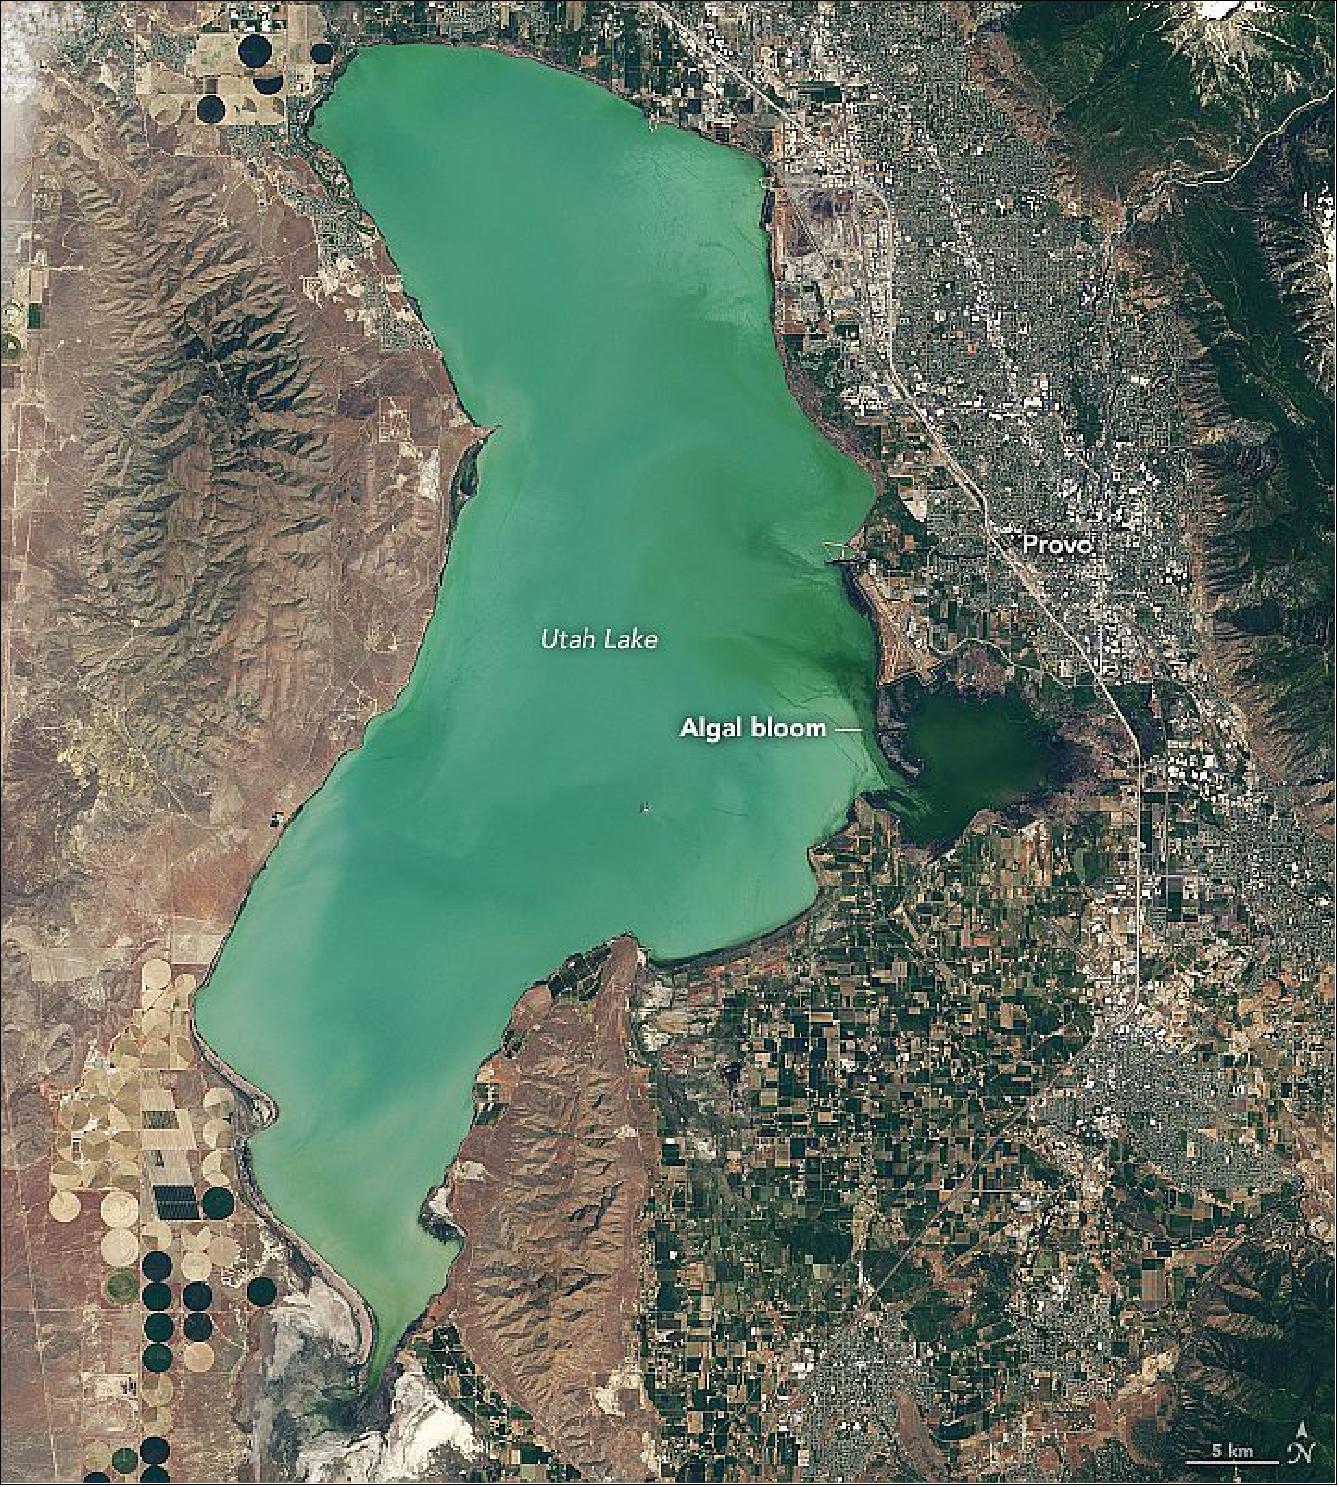 Figure 57: This image, acquired by the Operational Land Imager on Landsat 8, shows Utah Lake as it appeared in natural color on June 20, 2017 (image credit: NASA Earth Observatory, images by Lauren Dauphin, using Landsat data from the U.S. Geological Survey and data courtesy of Blake Schaeffer/EPA from Stroming, Signe, et al. (2020). Story by Aries Keck, NASA Earth Science Applied Sciences, with Mike Carlowicz)